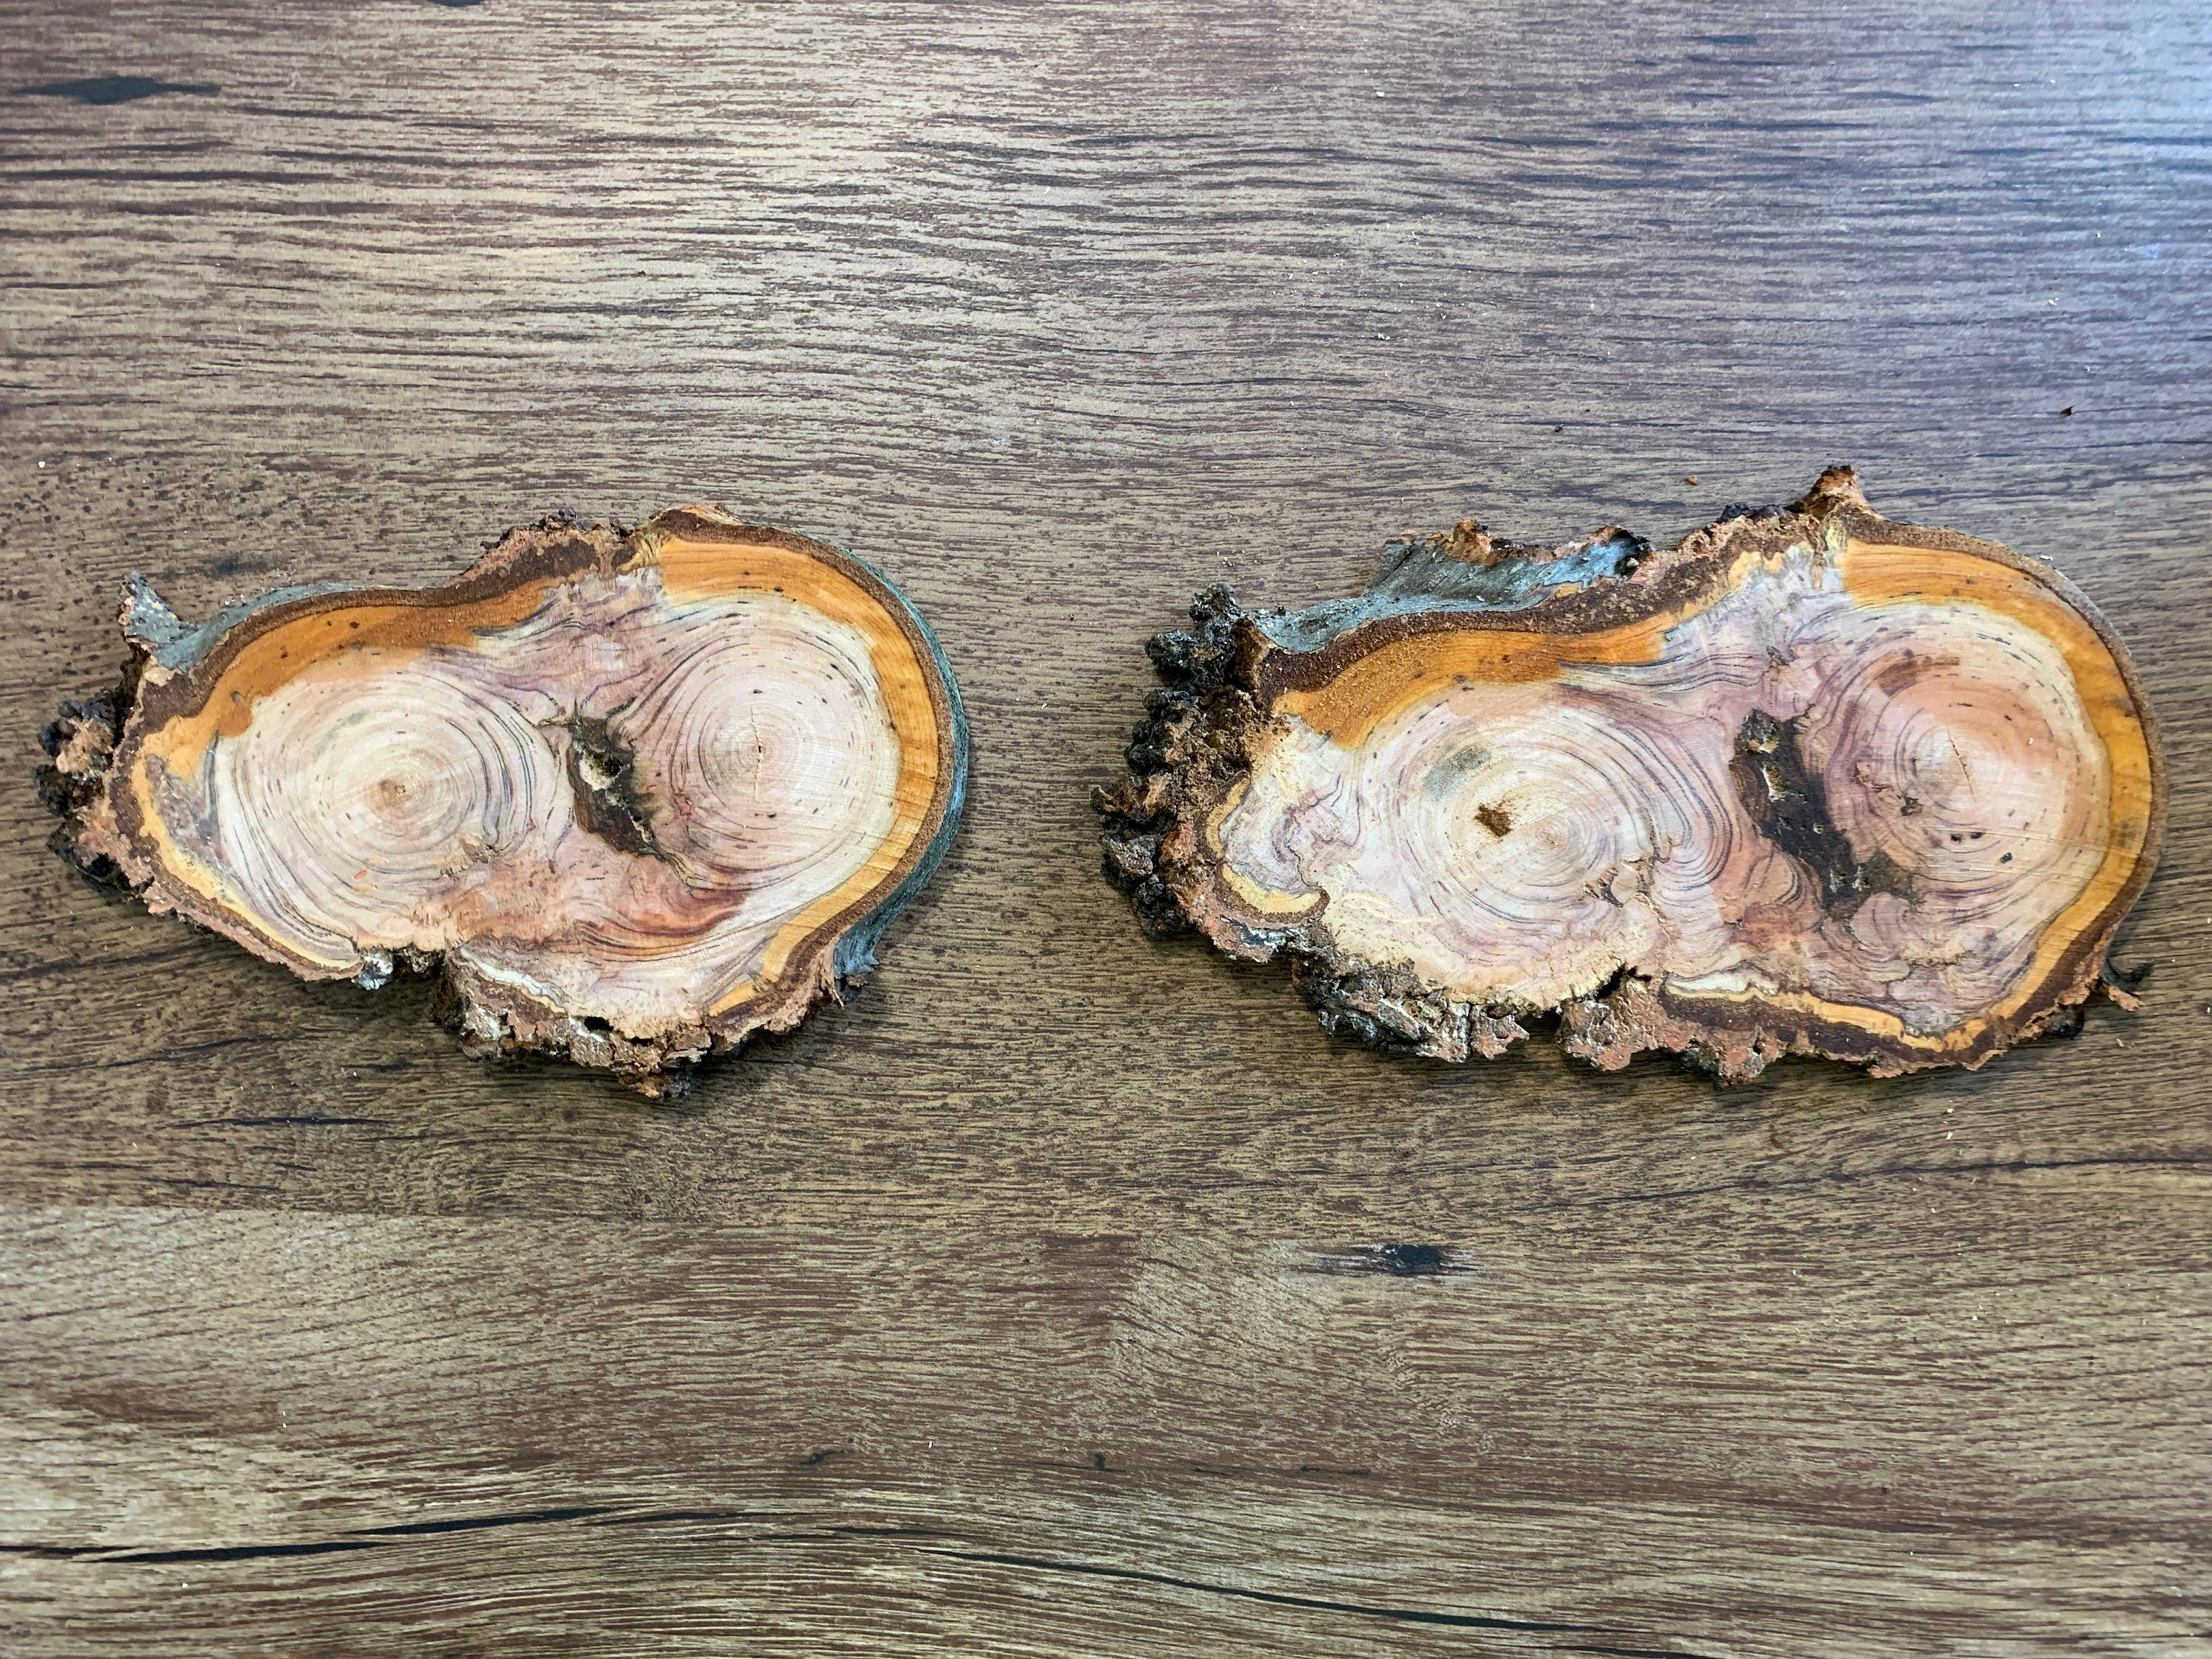 Cherry Burl Slices, 2 Long Cherry Burl Slices, Approximately 7 Inches Long x About 4 Inches and 1/2 Inch Thick